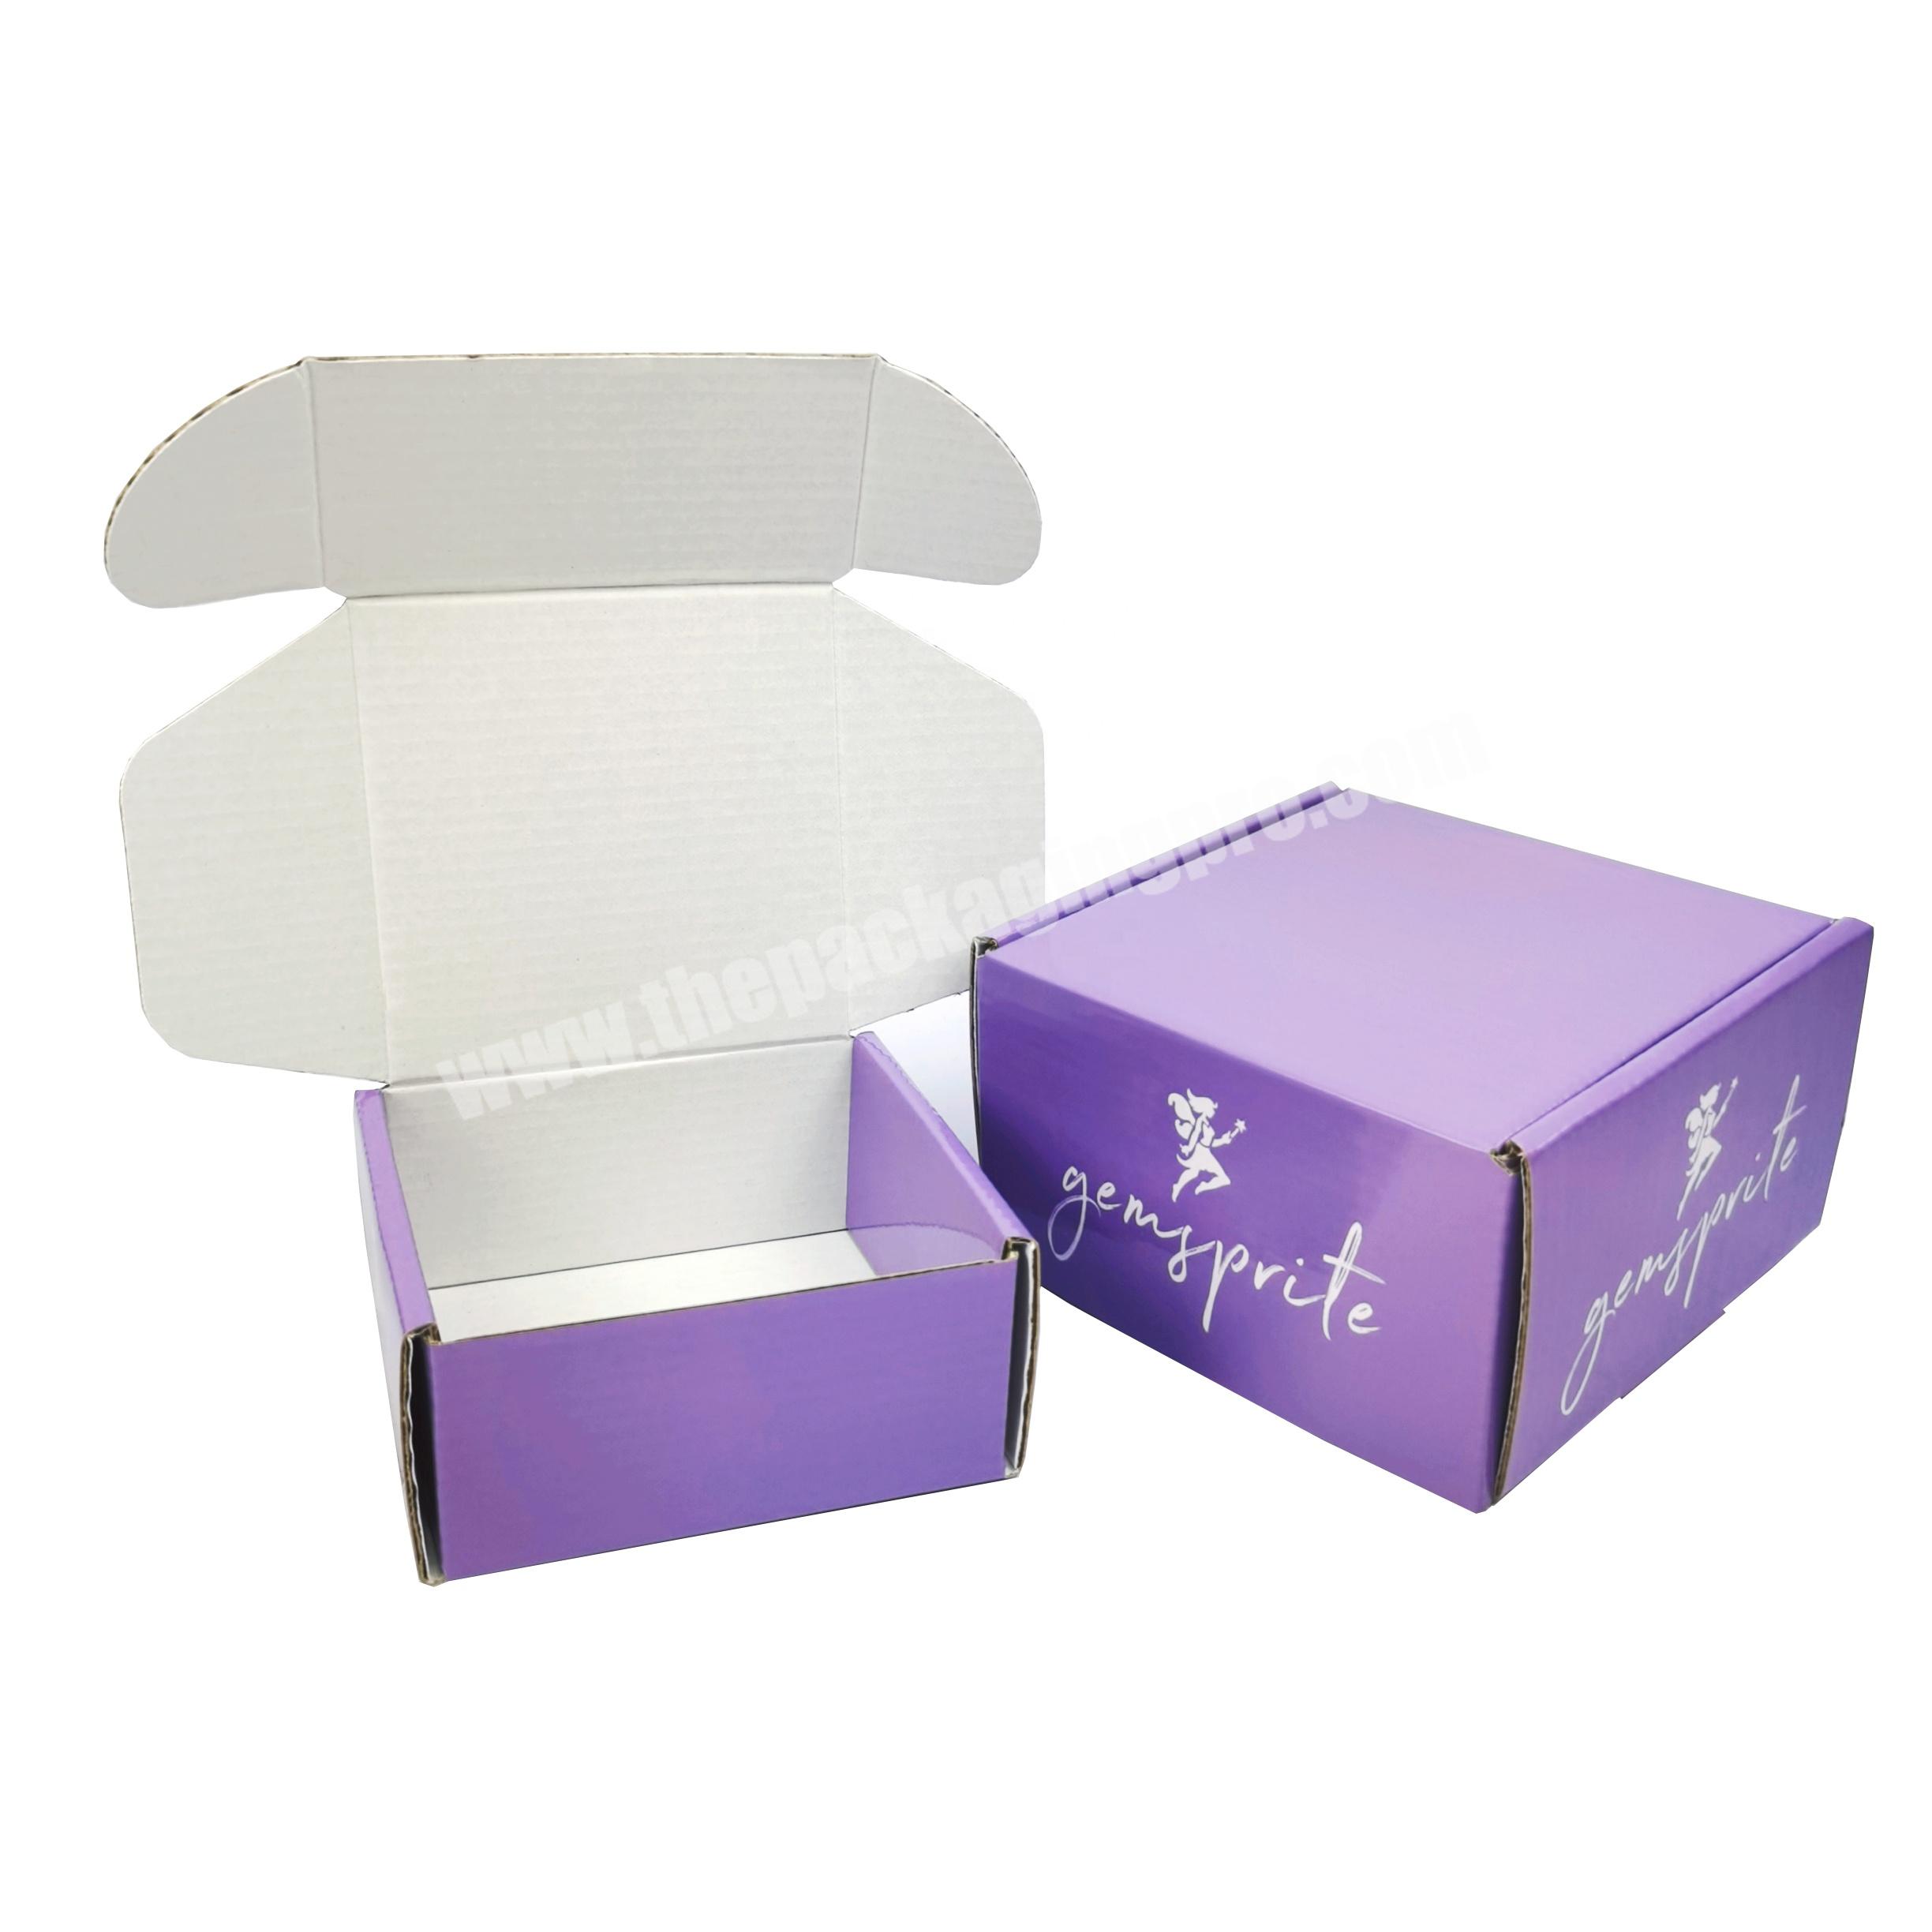 Wholesale shipping boxes custom logo mailer box corrugated carton gift boxes for Clothing Shoes Dress Apparel Lingerie packaging